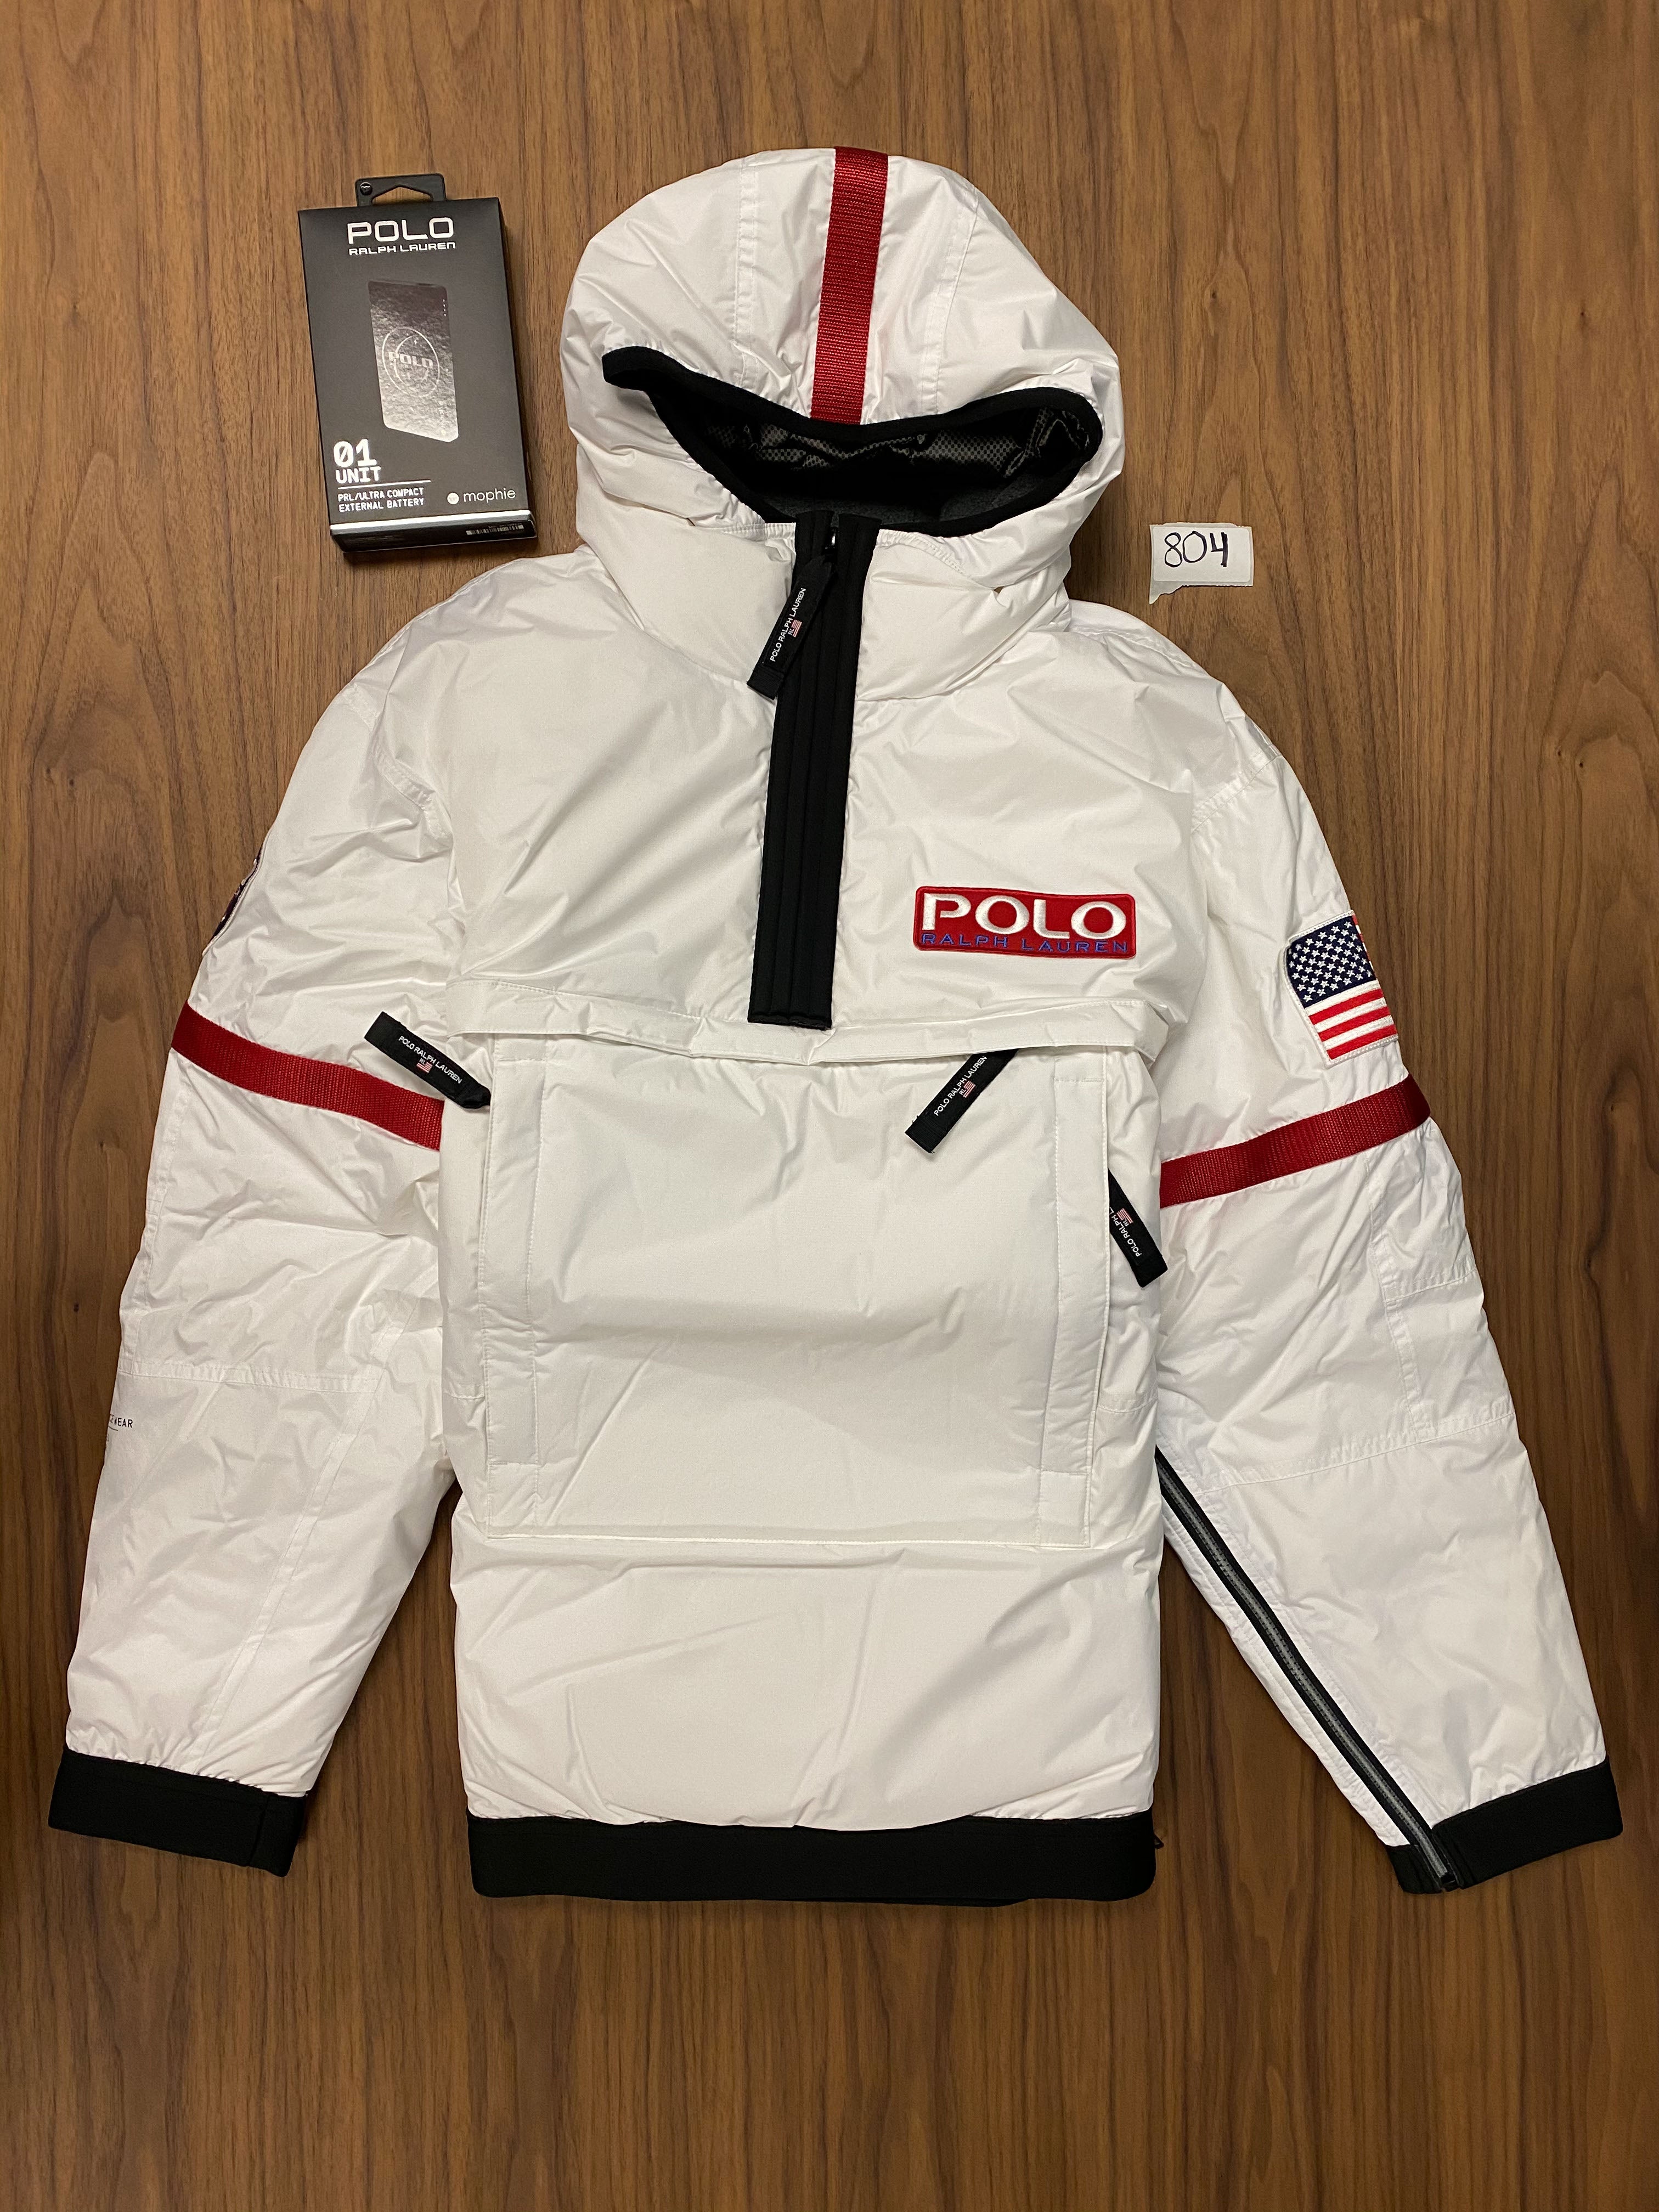 Polo Ralph Lauren Limited Edition Zip Up Puffer Jacket Apolo 11 - White/Black